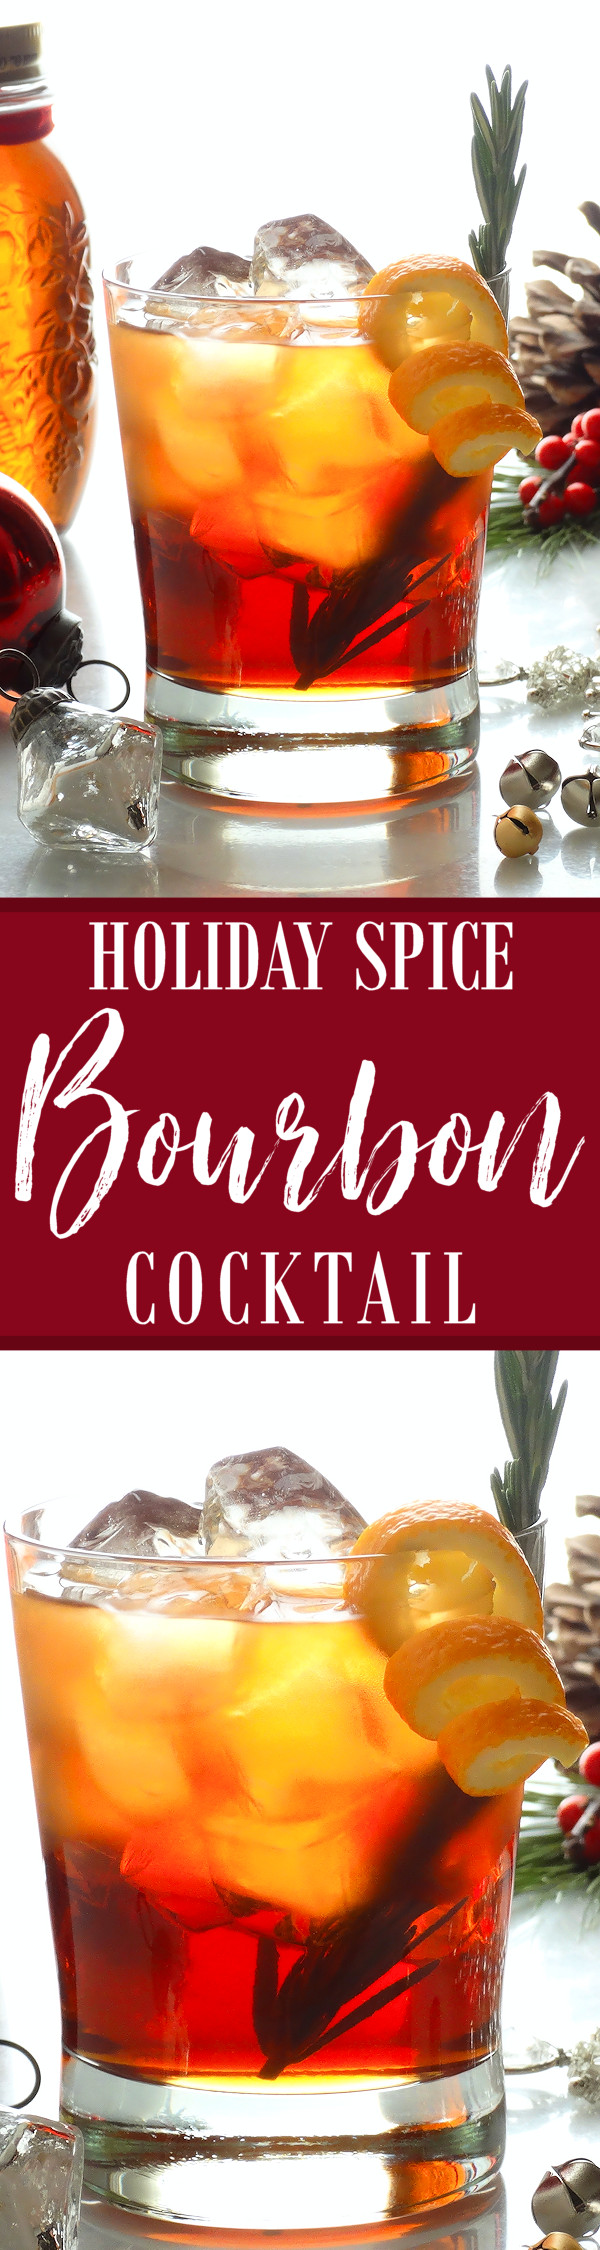 Holiday Whiskey Drinks
 Christmas in Connecticut Holiday Spice Bourbon Cocktail